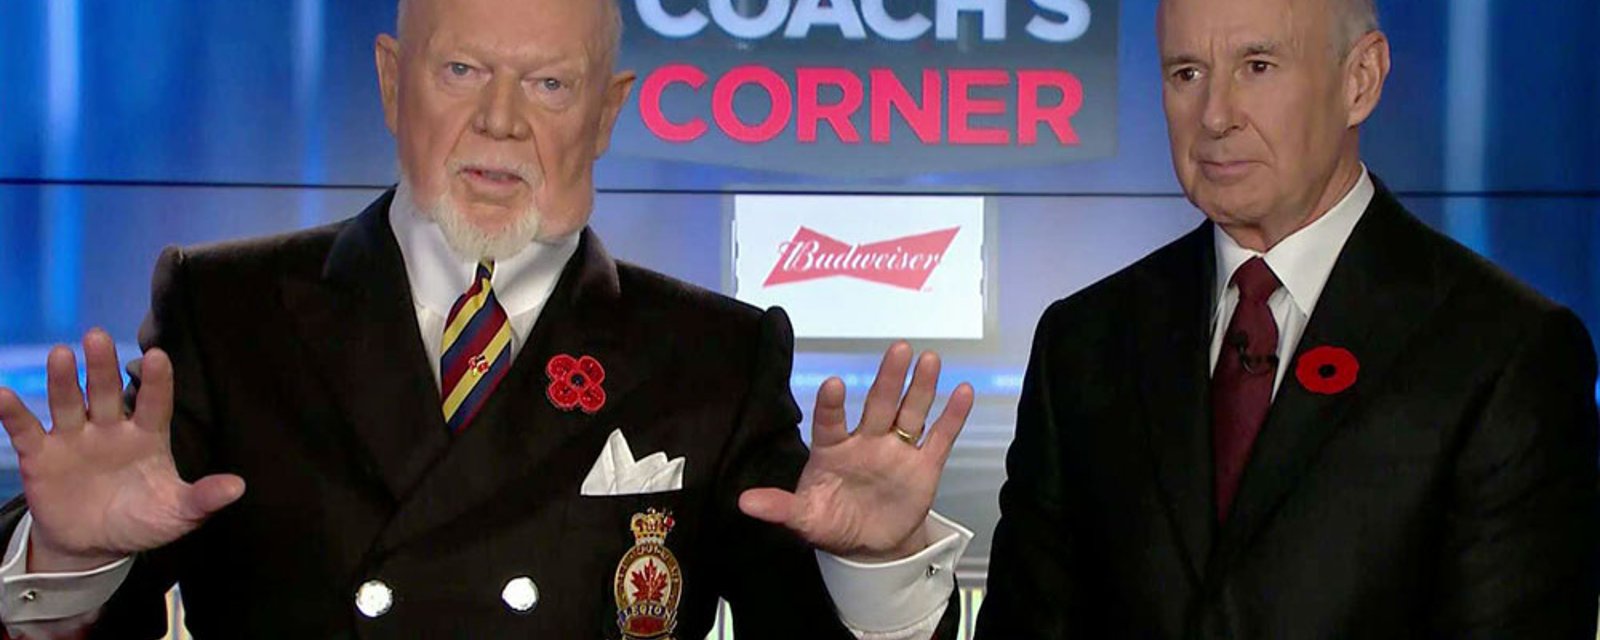 Don Cherry fired for “divisive remarks” concerning immigration 